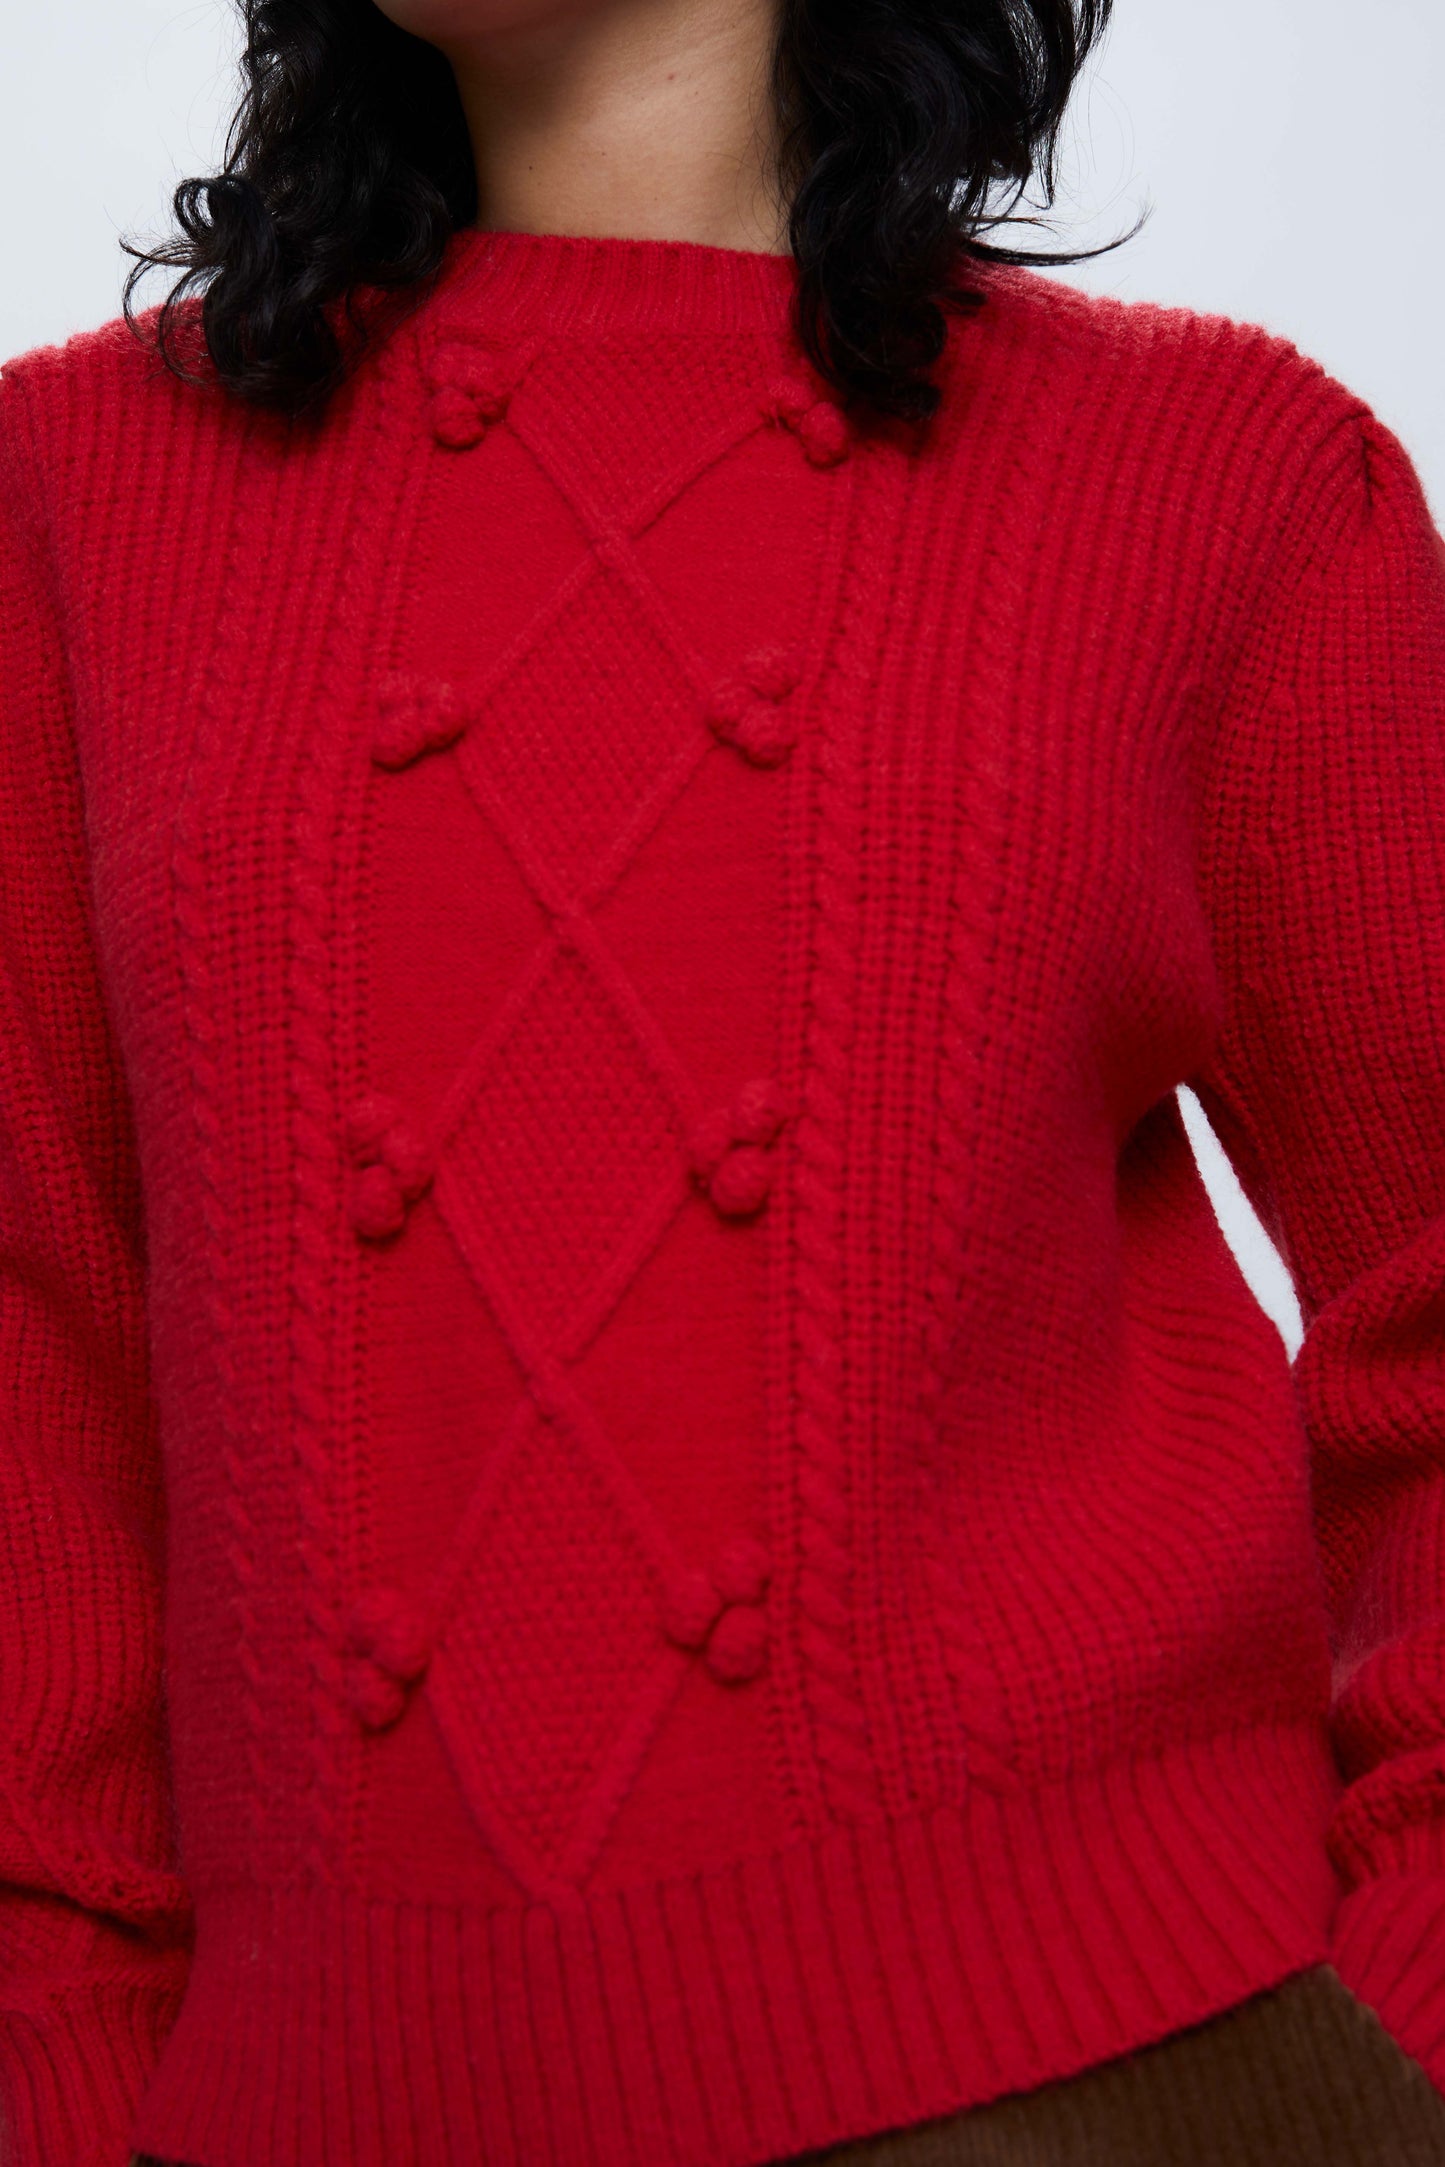 Red cable knit sweater